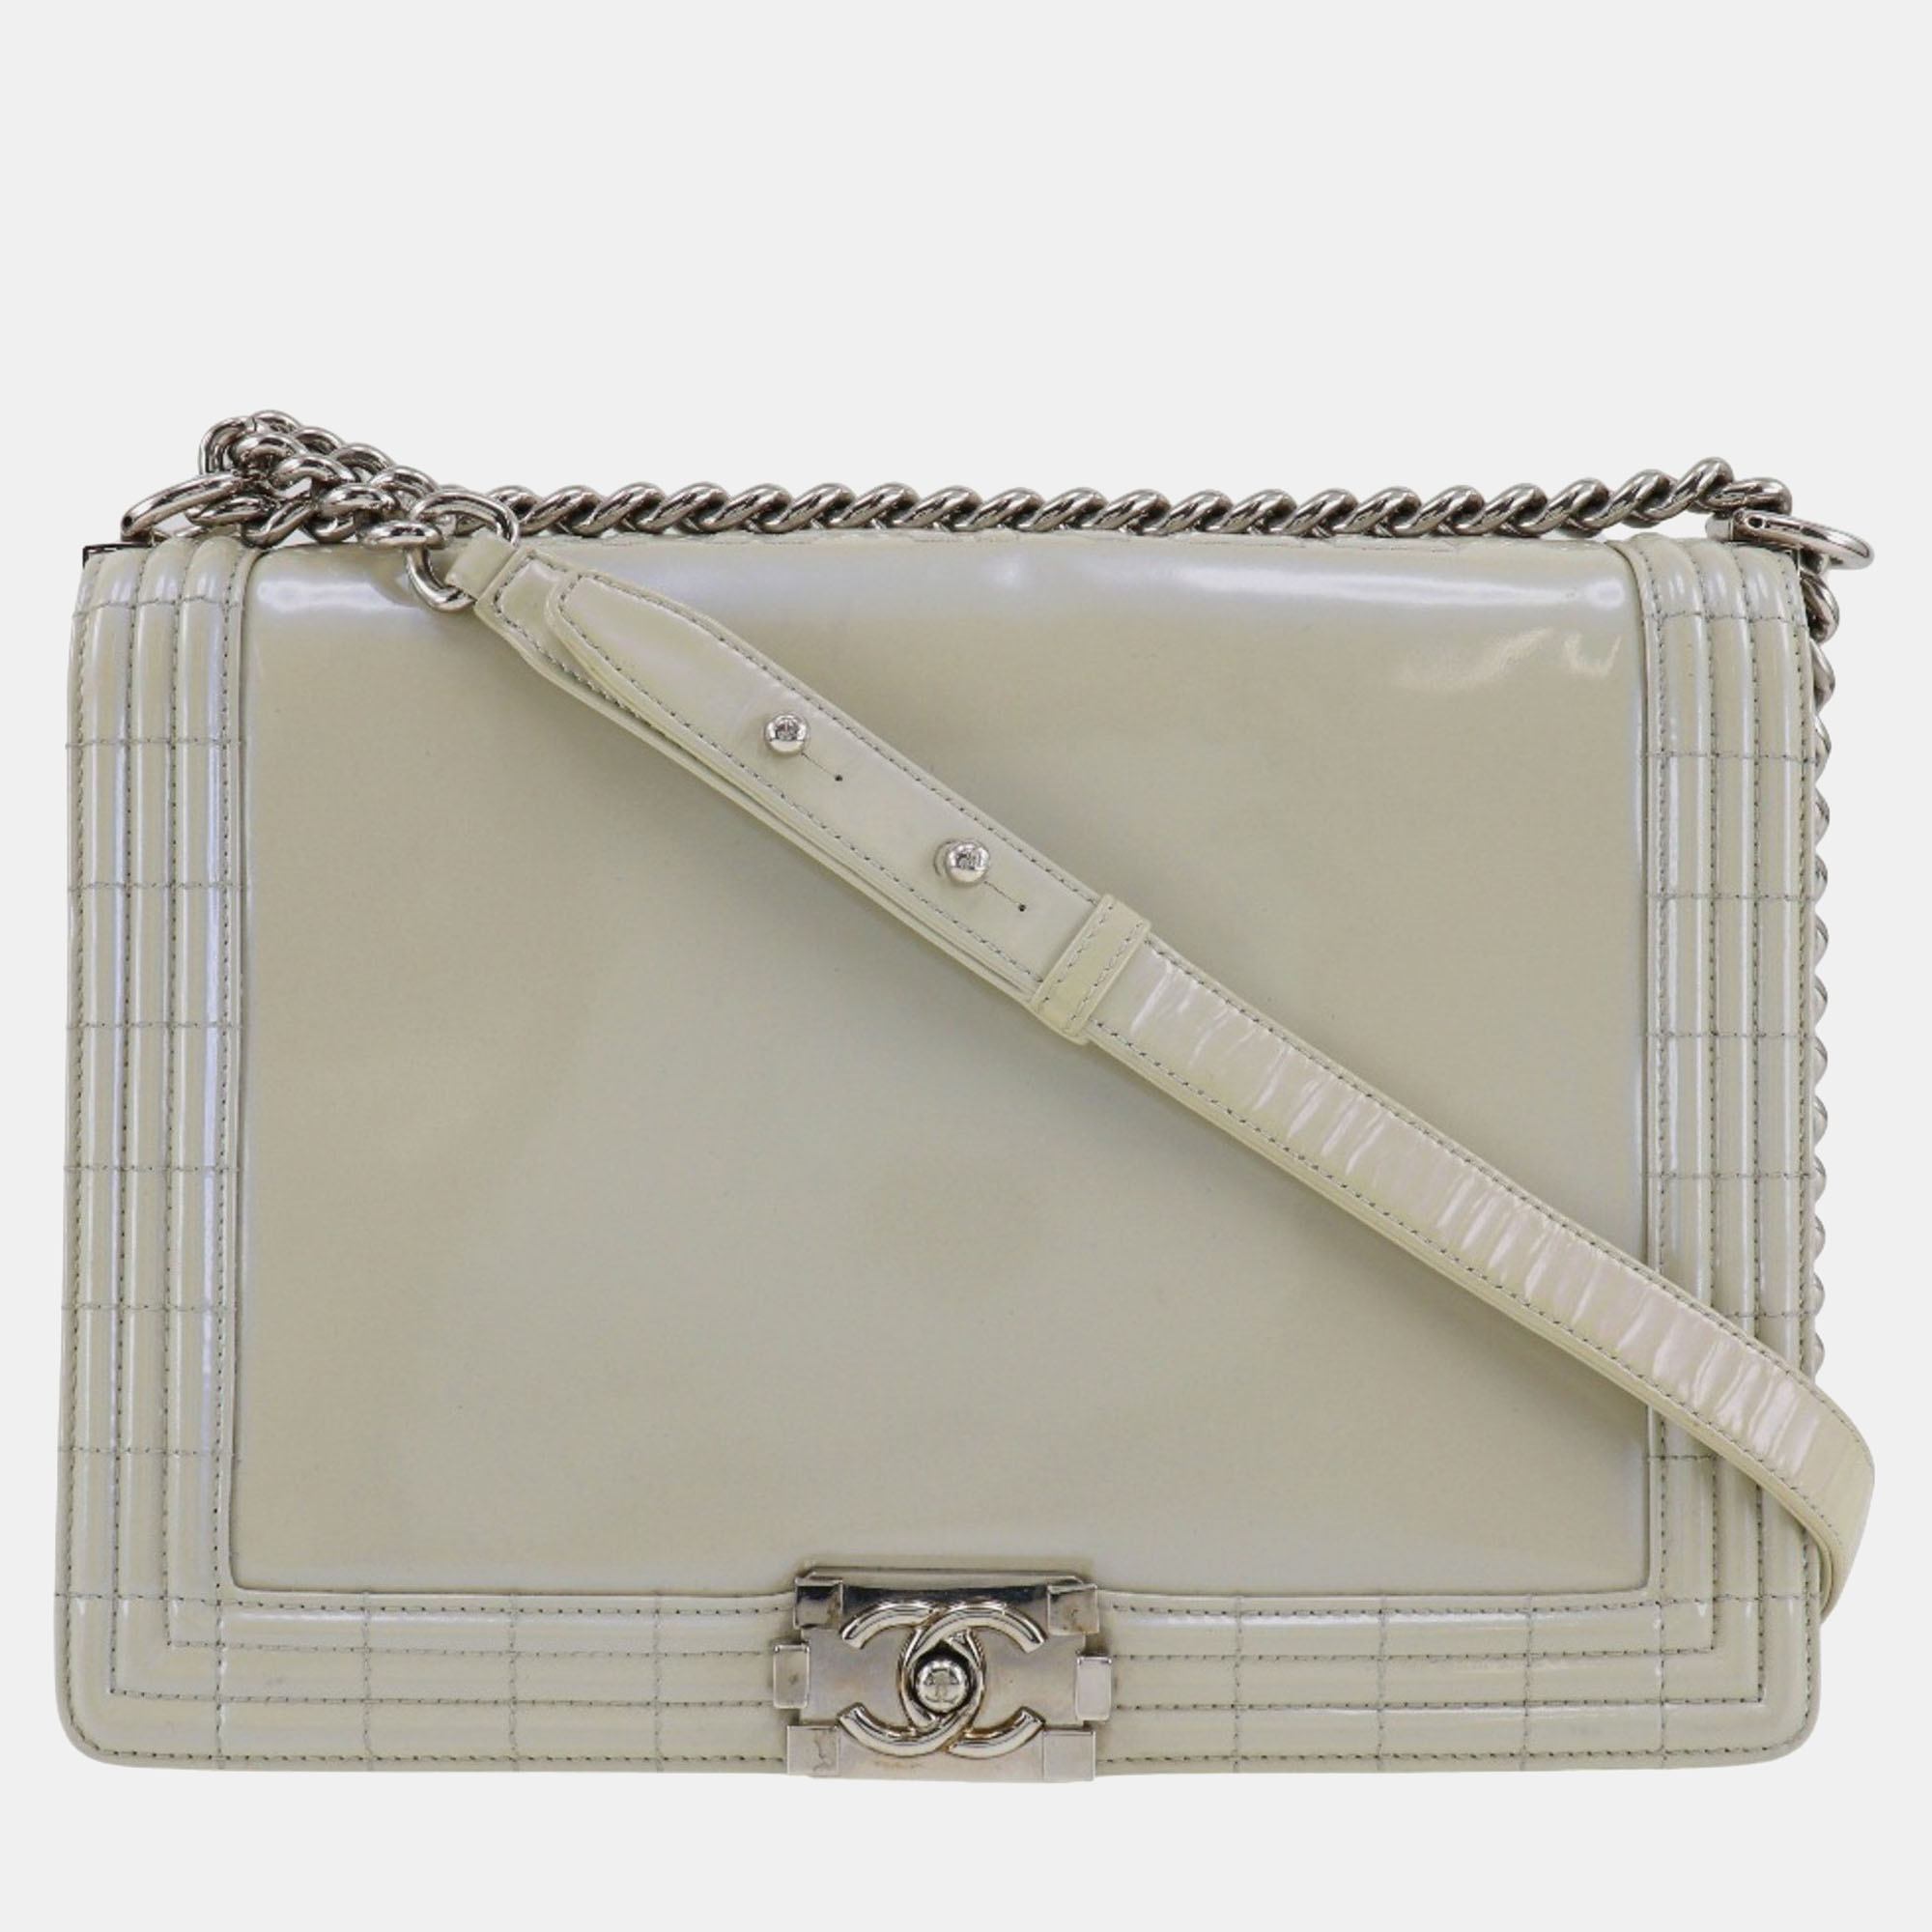 Chanel white leather large reverso boy bag